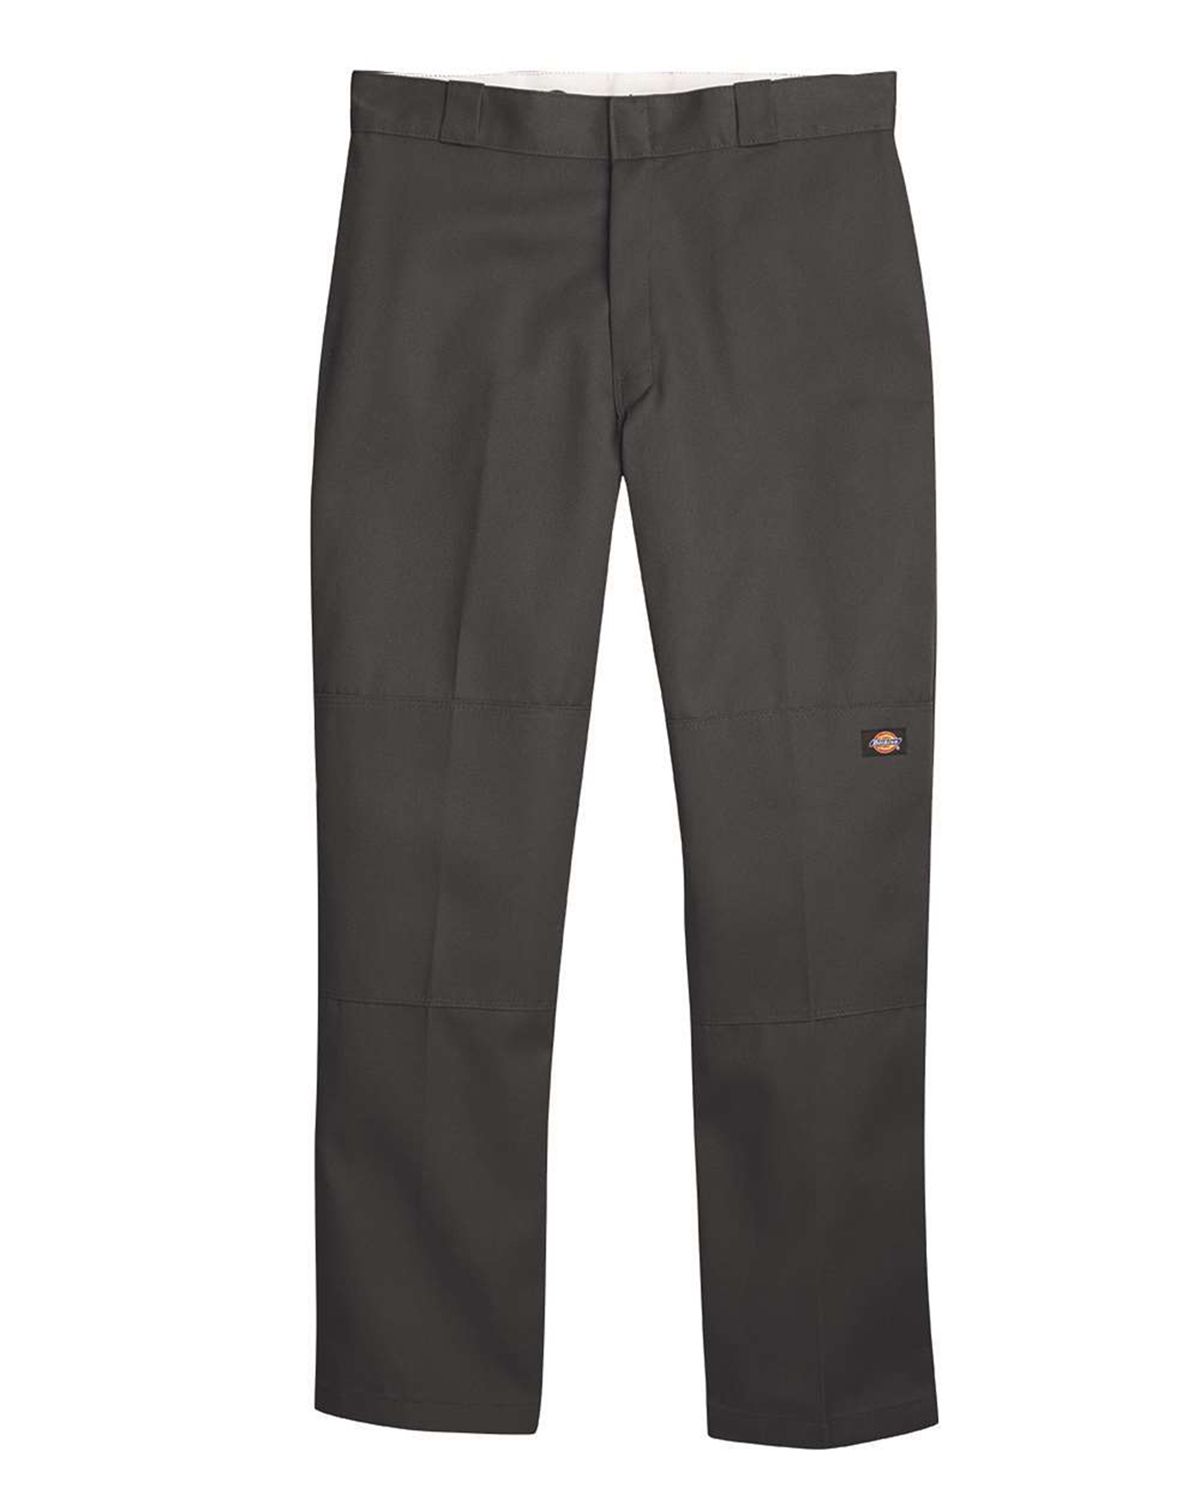 What size is 14 in men's trousers? - Quora